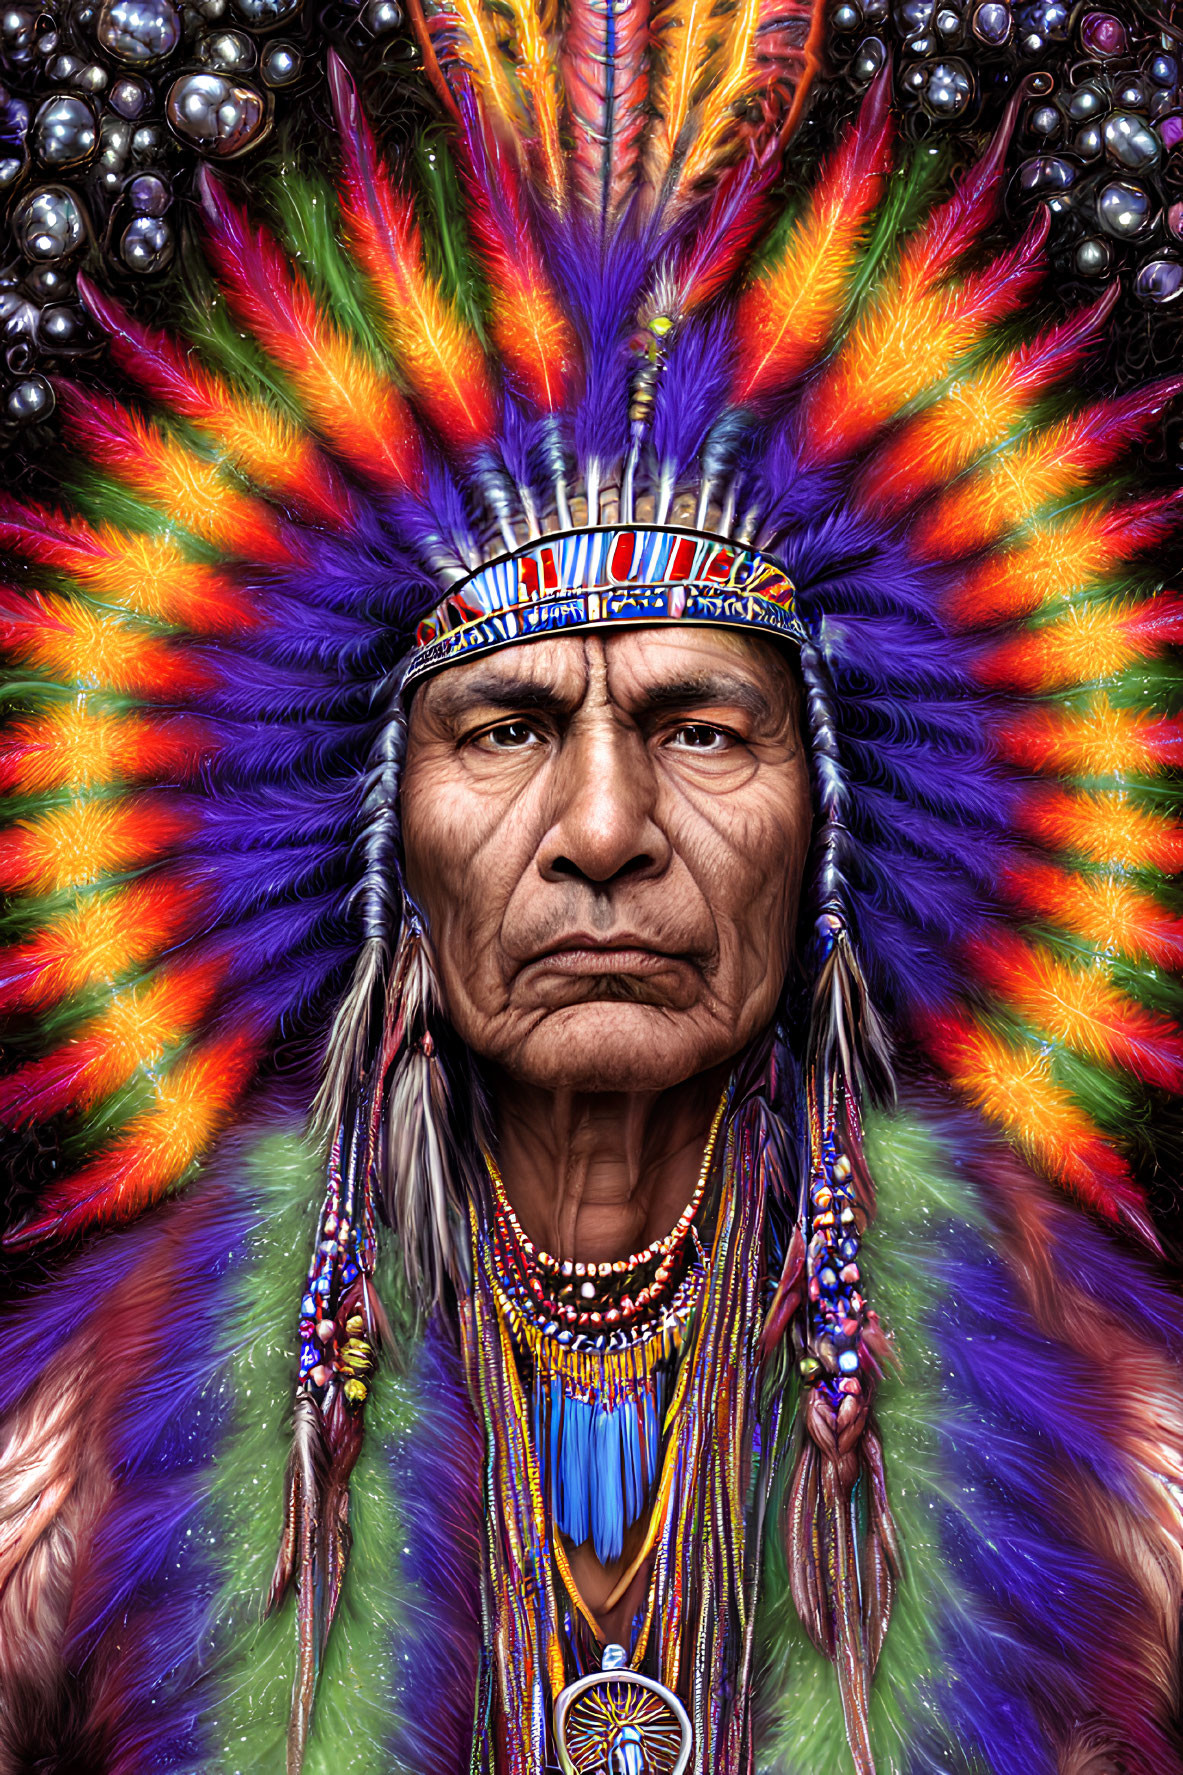 Person in Native American headdress with intricate beading and feathers on colorful background